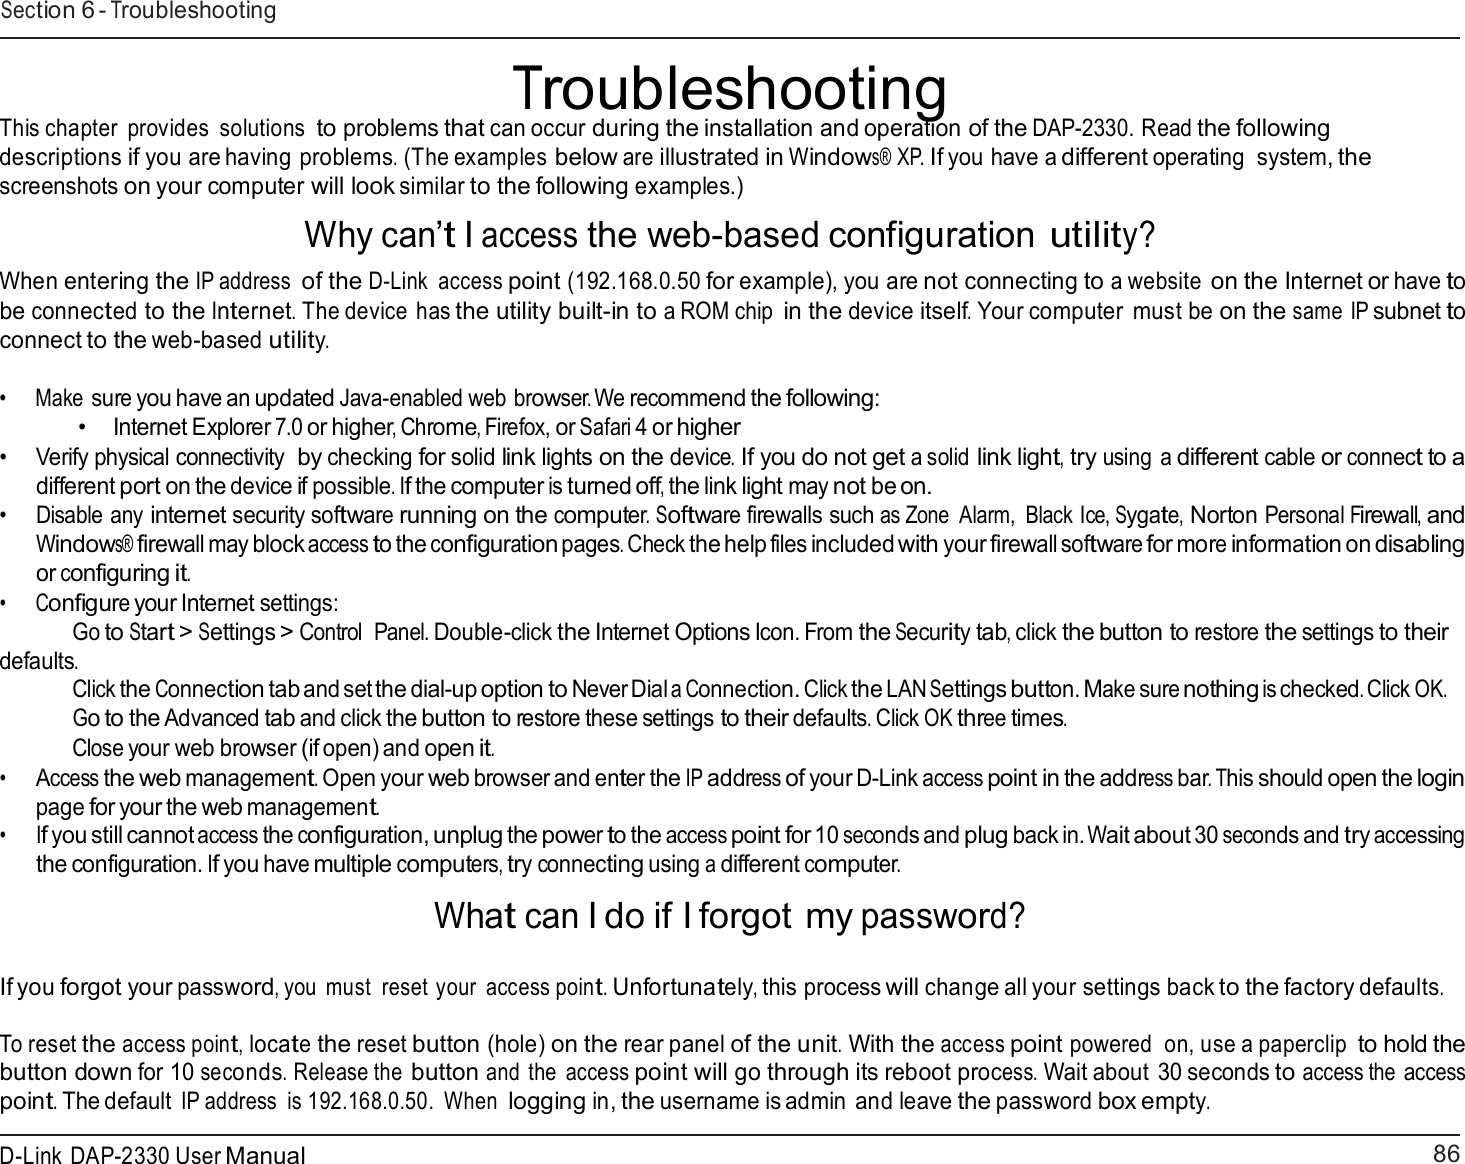 86 D-Link DAP-2330 User ManualSection 6 - Troubleshooting     Troubleshooting This chapter  provides  solutions to problems that can occur during the installation and operation of the DAP-2330. Read the following descriptions if you are having problems. (The examples below are illustrated in Windows® XP. If you have a different operating  system, the screenshots on your computer will look similar to the following examples.)  Why can’t I access the web-based configuration utility?  When entering the IP address of the D-Link  access point (192.168.0.50 for example), you are not connecting to a website on the Internet or have to be connected to the Internet. The device has the utility built-in to a ROM chip in the device itself. Your computer  must be on the same IP subnet to connect to the web-based utility.  •     Make sure you have an updated Java-enabled web browser. We recommend the following: • Internet Explorer 7.0 or higher, Chrome, Firefox, or Safari 4 or higher • Verify physical connectivity  by checking for solid link lights on the device. If you do not get a solid link light, try using a different cable or connect to a different port on the device if possible. If the computer is turned off, the link light may not be on. • Disable any internet security software running on the computer. Software firewalls such as Zone  Alarm,  Black Ice, Sygate, Norton Personal Firewall, and Windows® firewall may block access to the configuration pages. Check the help files included with your firewall software for more information on disabling or configuring it. •      Configure your Internet settings: Go to Start &gt; Settings &gt; Control  Panel. Double-click the Internet Options Icon. From the Security tab, click the button to restore the settings to their defaults. Click the Connection tab and set the dial-up option to Never Dial a Connection. Click the LAN Settings button. Make sure nothing is checked. Click OK. Go to the Advanced tab and click the button to restore these settings to their defaults. Click OK three times. Close your web browser (if open) and open it. • Access the web management. Open your web browser and enter the IP address of your D-Link access point in the address bar. This should open the login page for your the web management. • If you still cannot access the configuration, unplug the power to the access point for 10 seconds and plug back in. Wait about 30 seconds and try accessing the configuration. If you have multiple computers, try connecting using a different computer.  What can I do if I forgot my password?   If you forgot your password, you must  reset your  access point. Unfortunately, this process will change all your settings back to the factory defaults.  To reset the access point, locate the reset button (hole) on the rear panel of the unit. With the access point powered  on, use a paperclip to hold the button down for 10 seconds. Release the button and the  access point will go through its reboot process. Wait about 30 seconds to access the access point. The default IP address  is 192.168.0.50.  When logging in, the username is admin and leave the password box empty. 